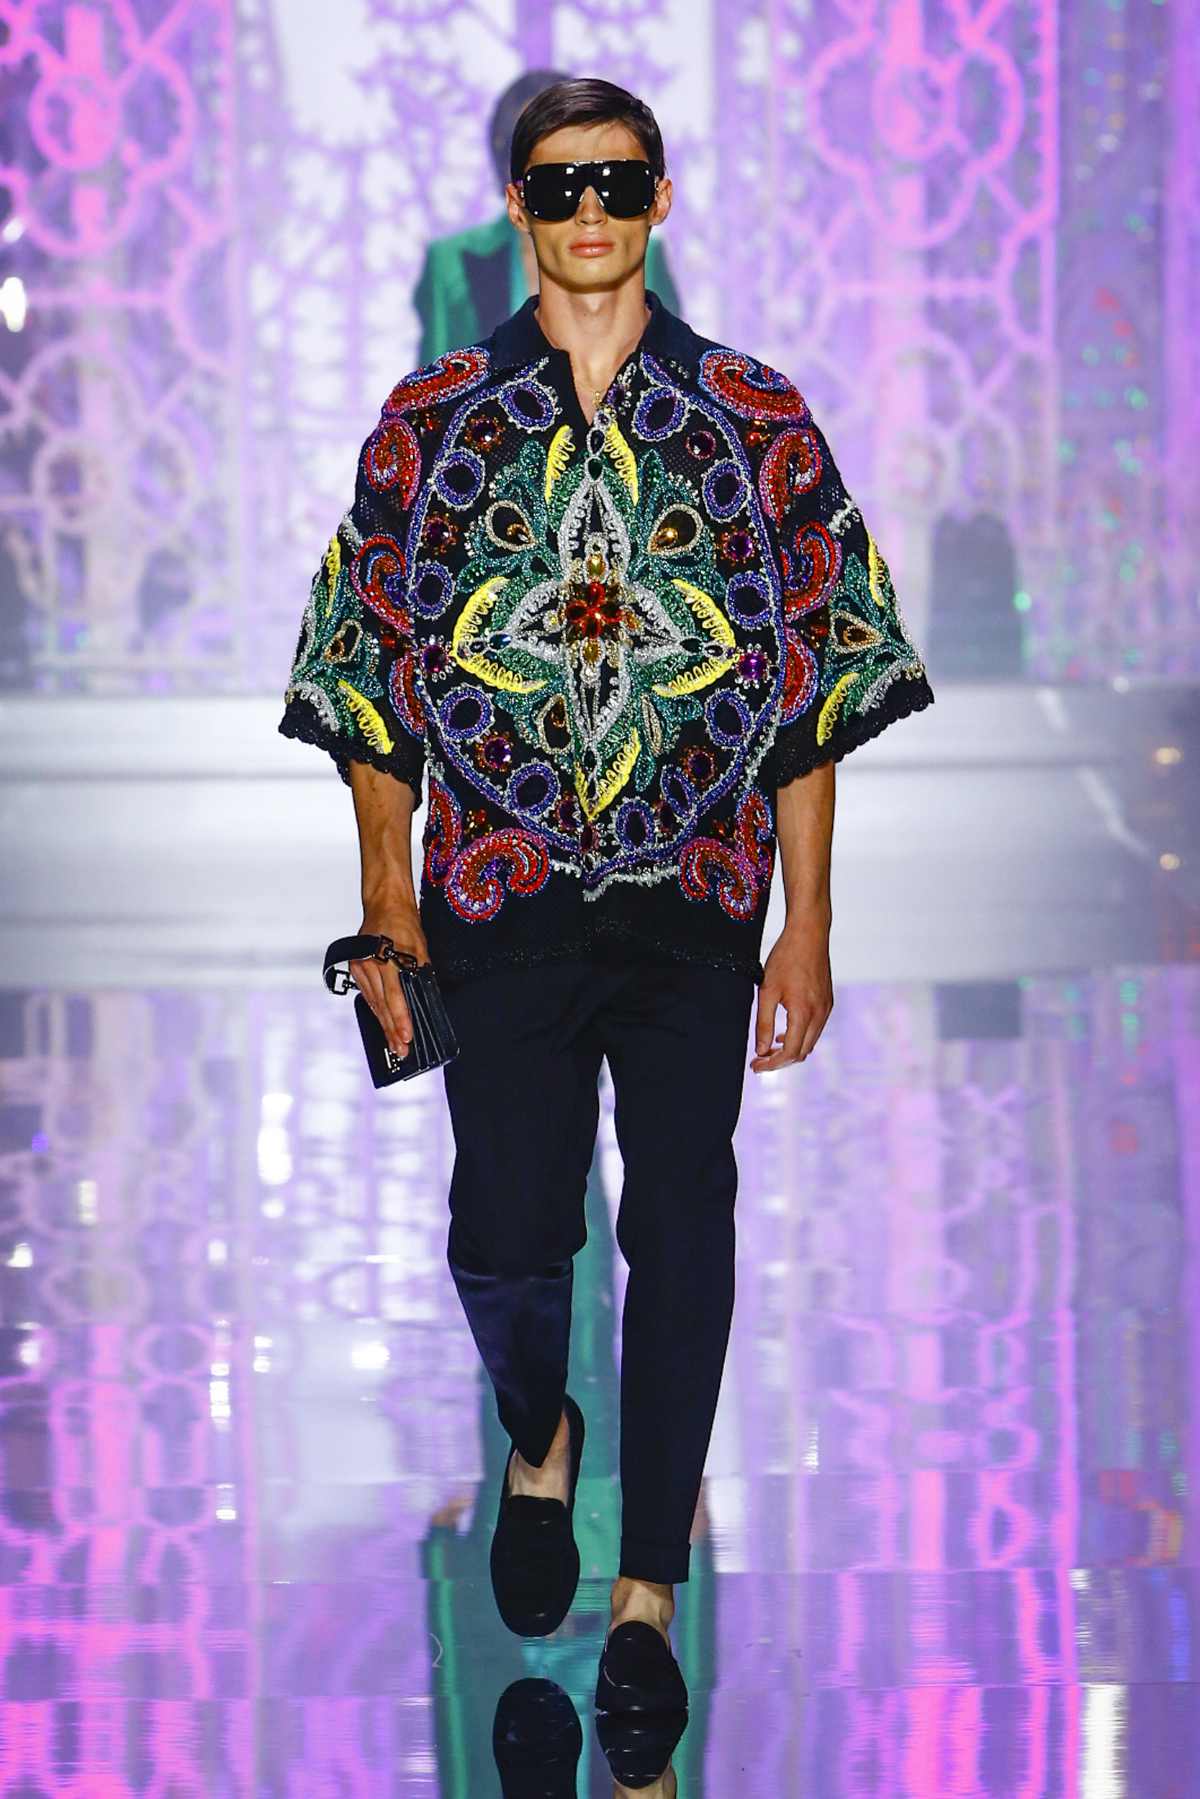 Dolce&Gabbana Presents Its New Spring Summer 2022 Men’s Fashion Show: #DGLightTherapy